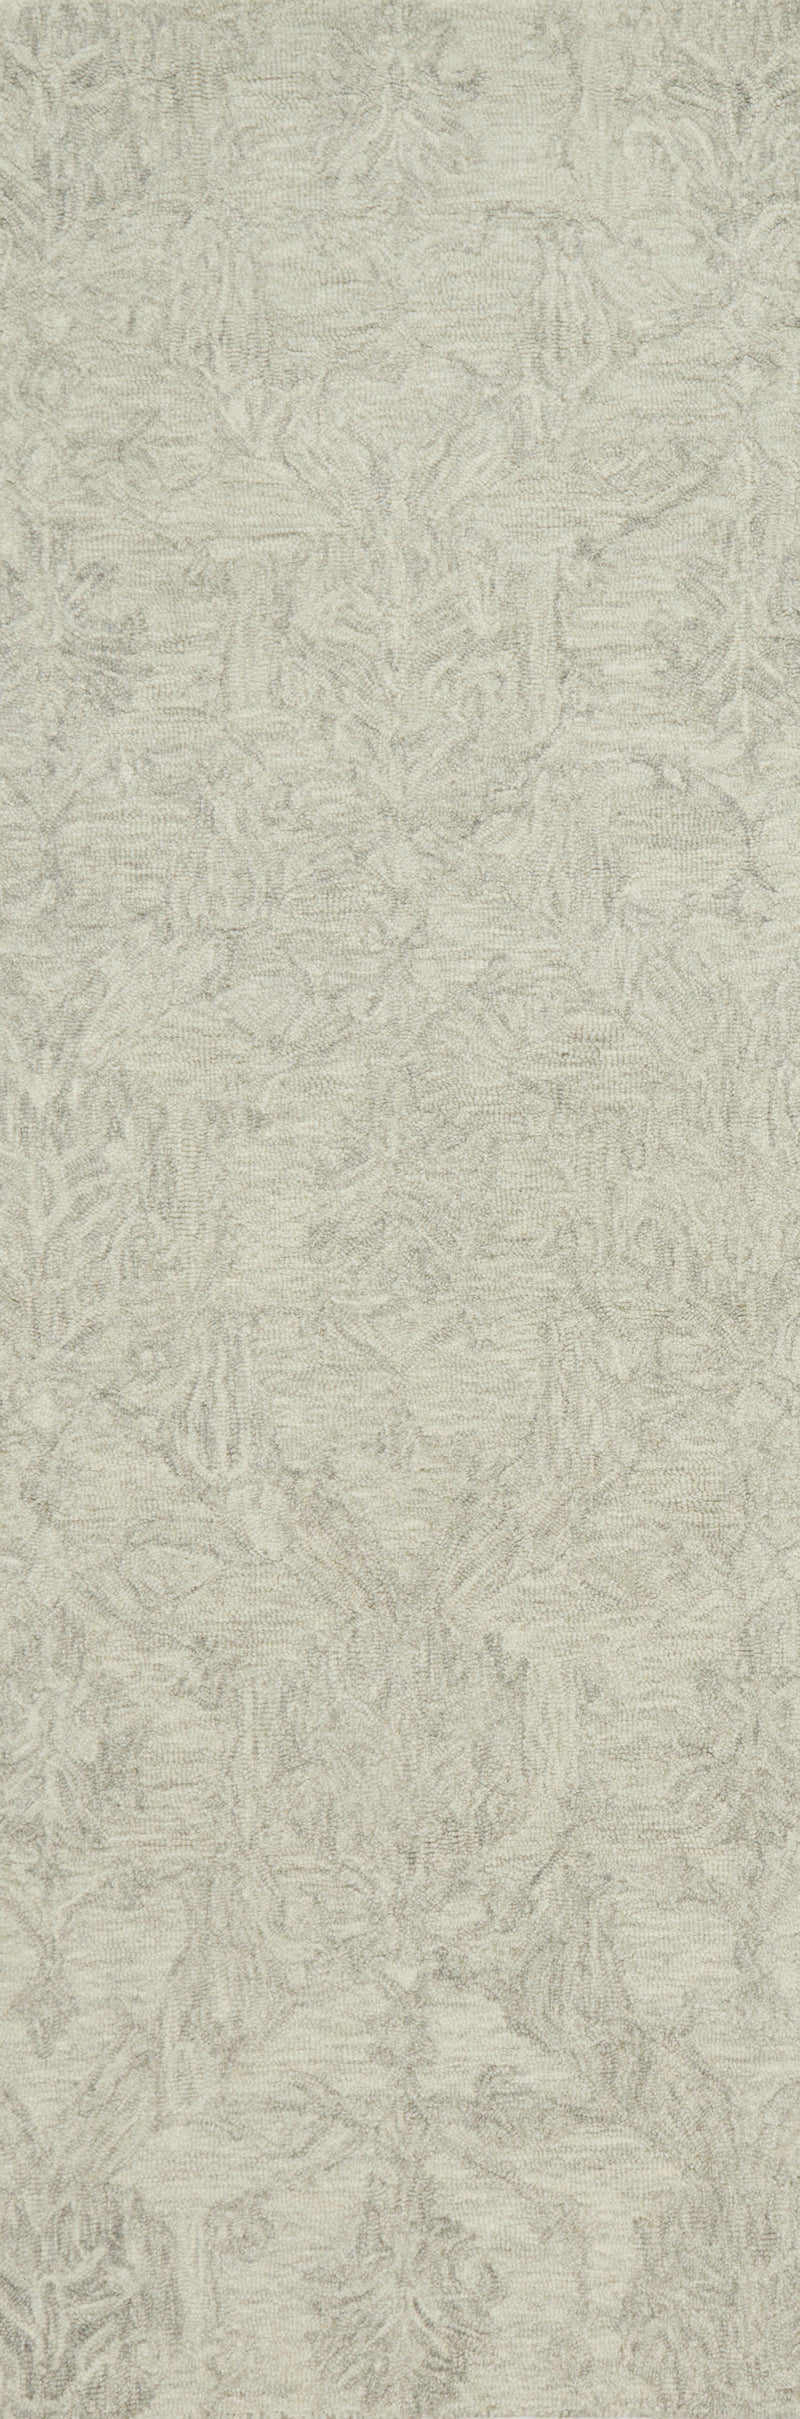 LYLE Collection Wool Rug  in  MIST Beige Runner Hand-Hooked Wool